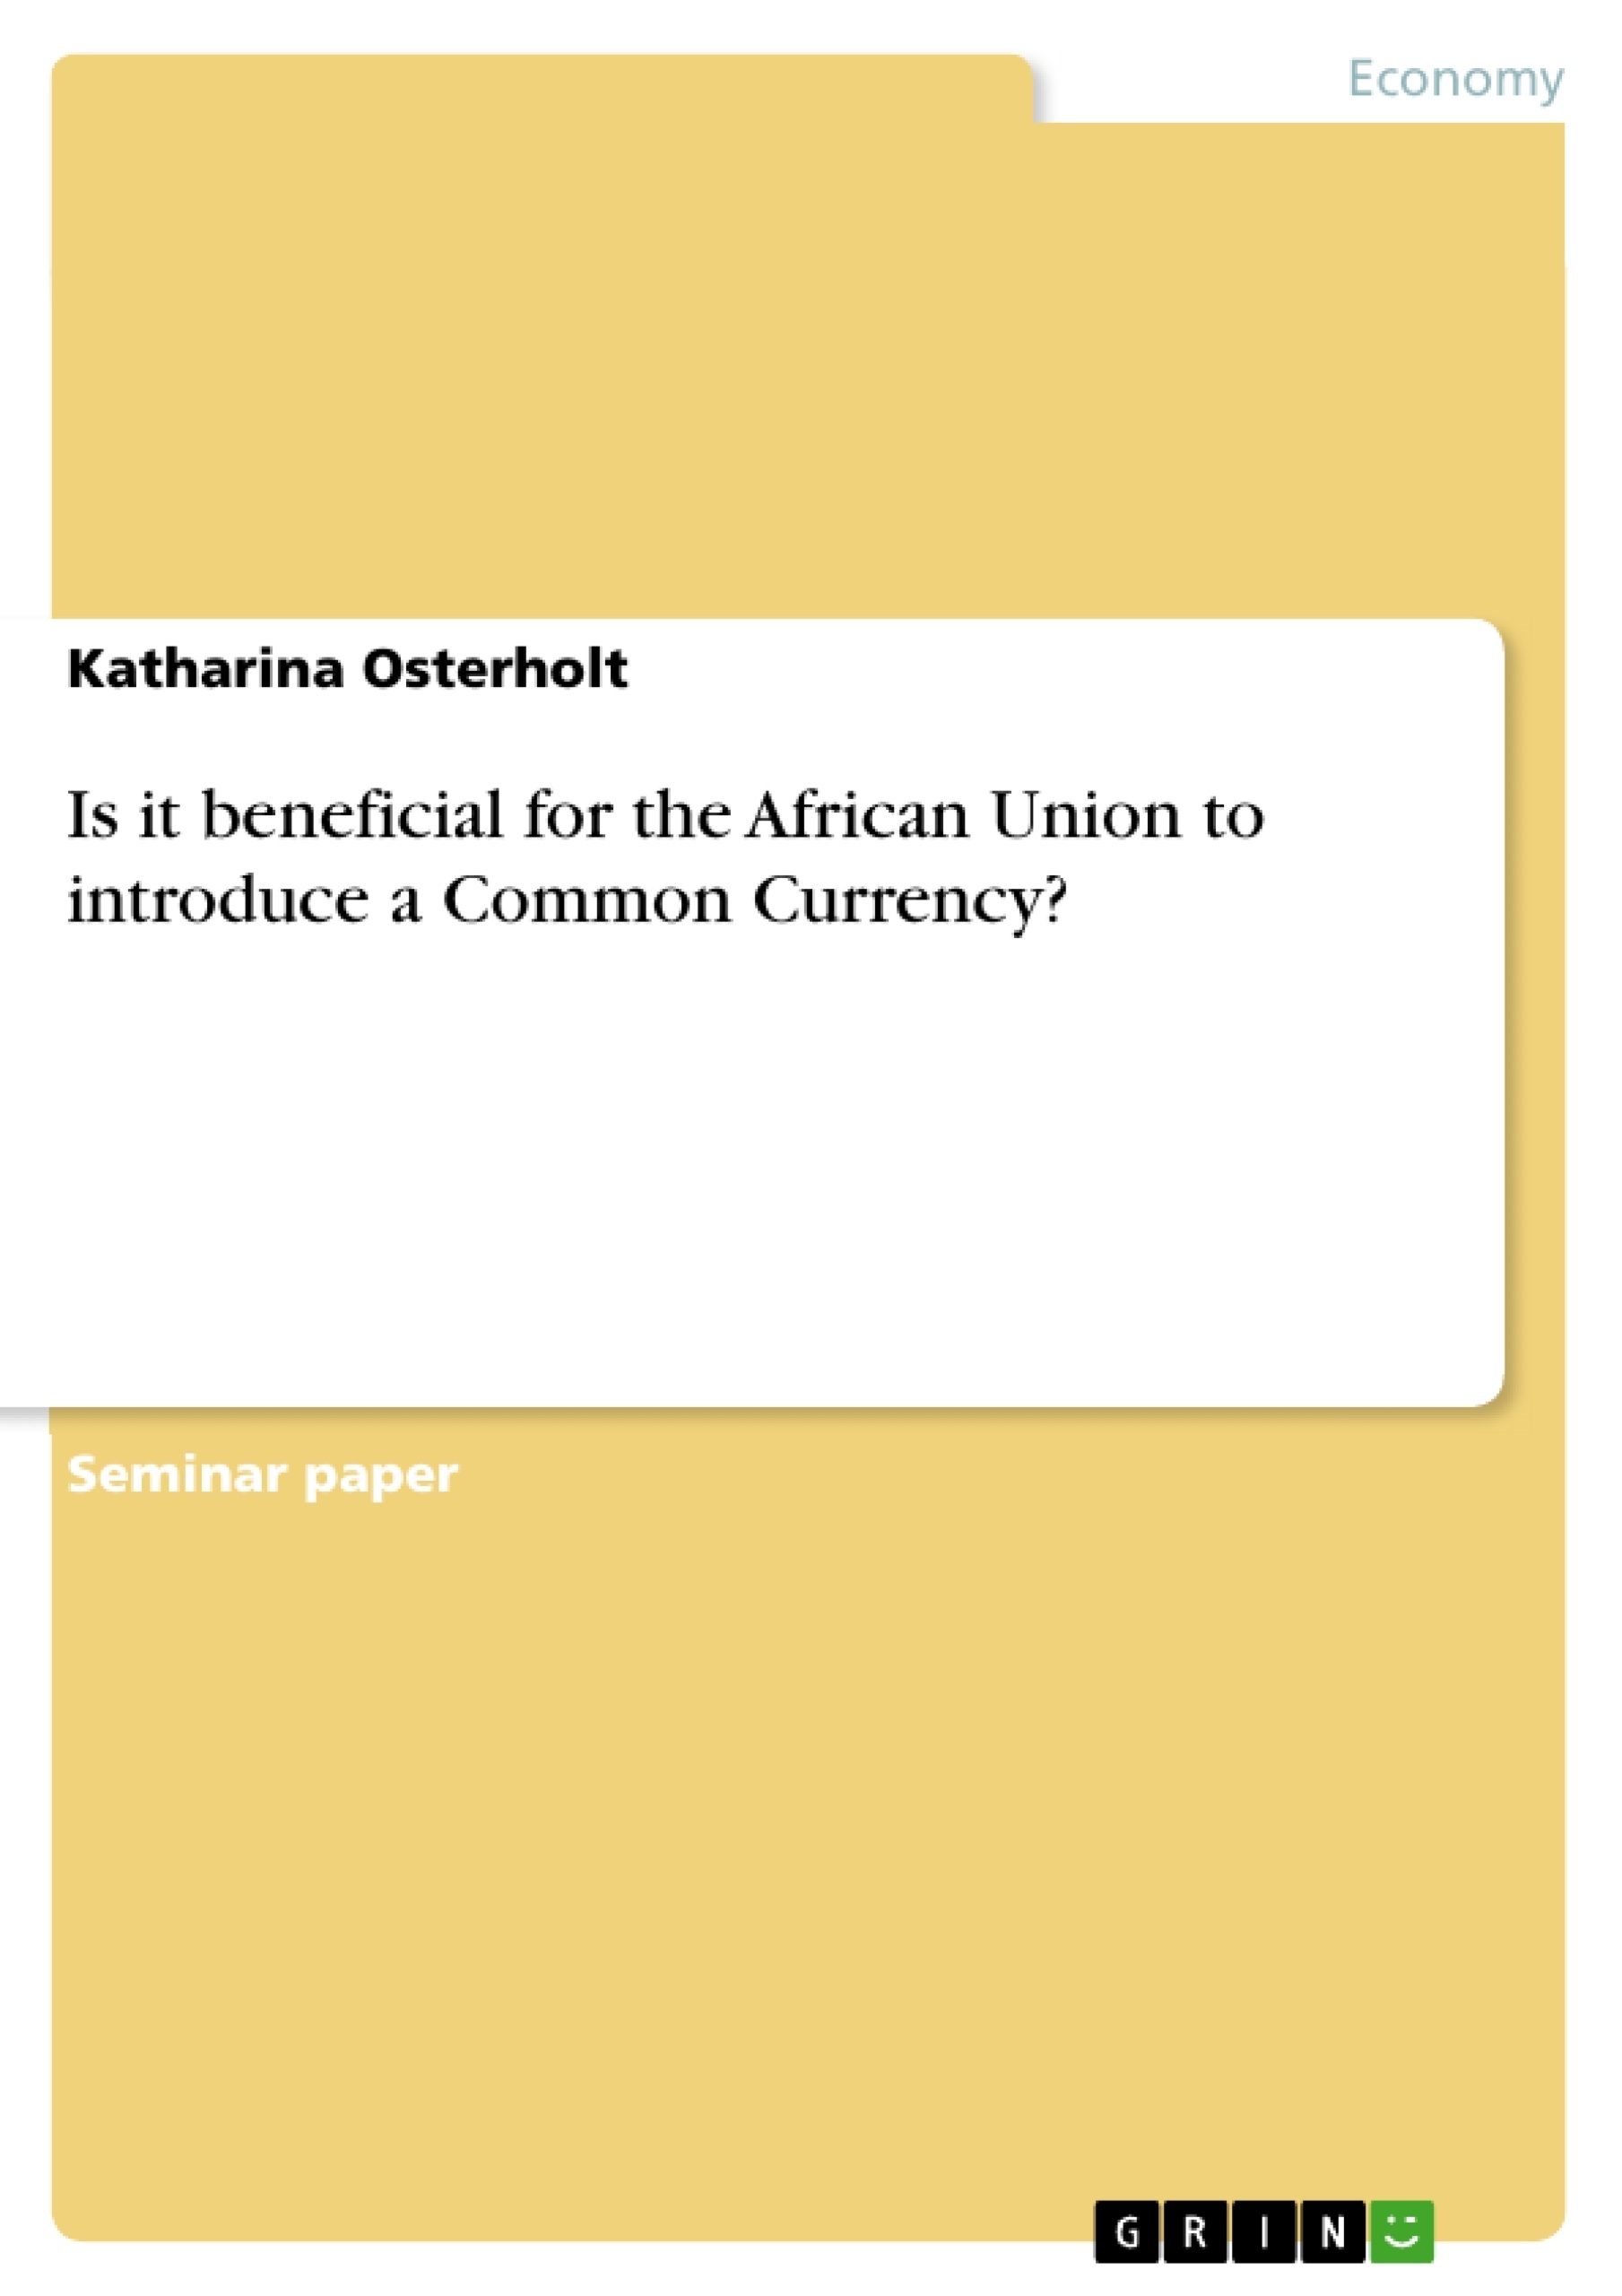 Title: Is it beneficial for the African Union to introduce a Common Currency?